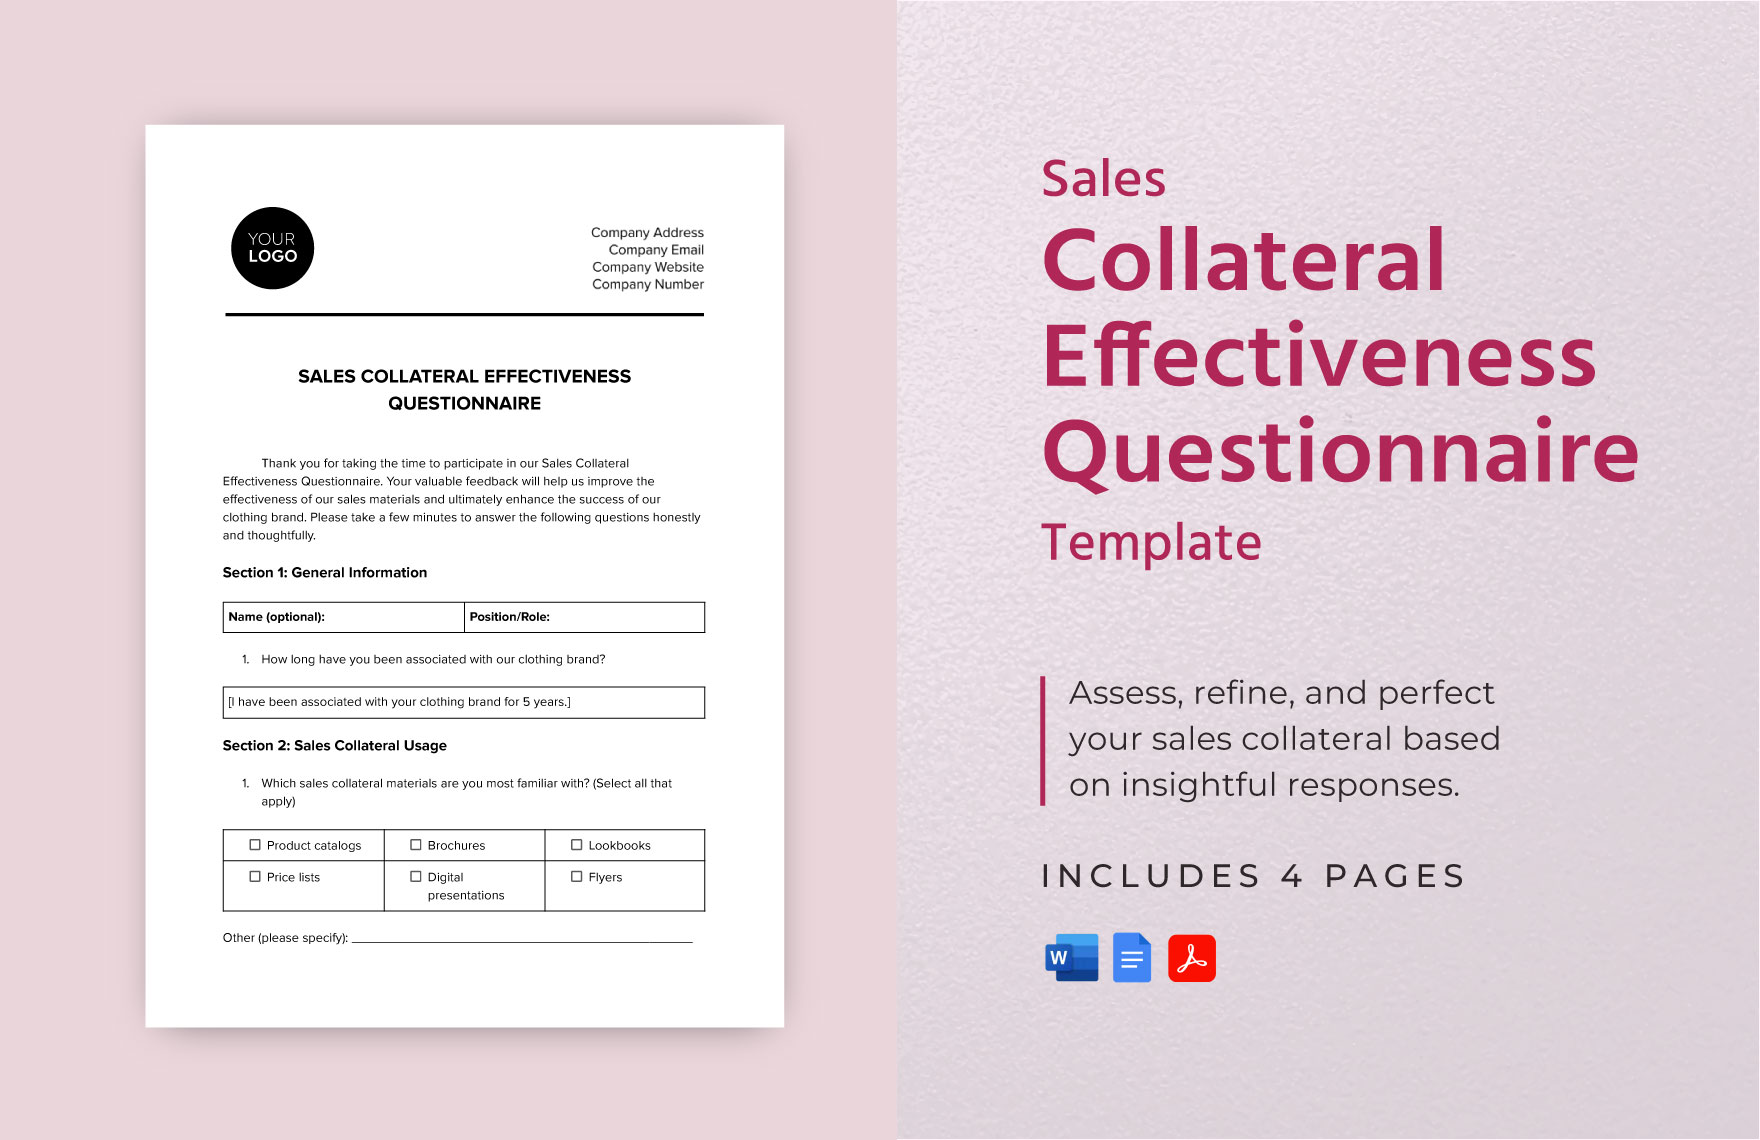 Sales Collateral Effectiveness Questionnaire Template in Word, Google Docs, PDF